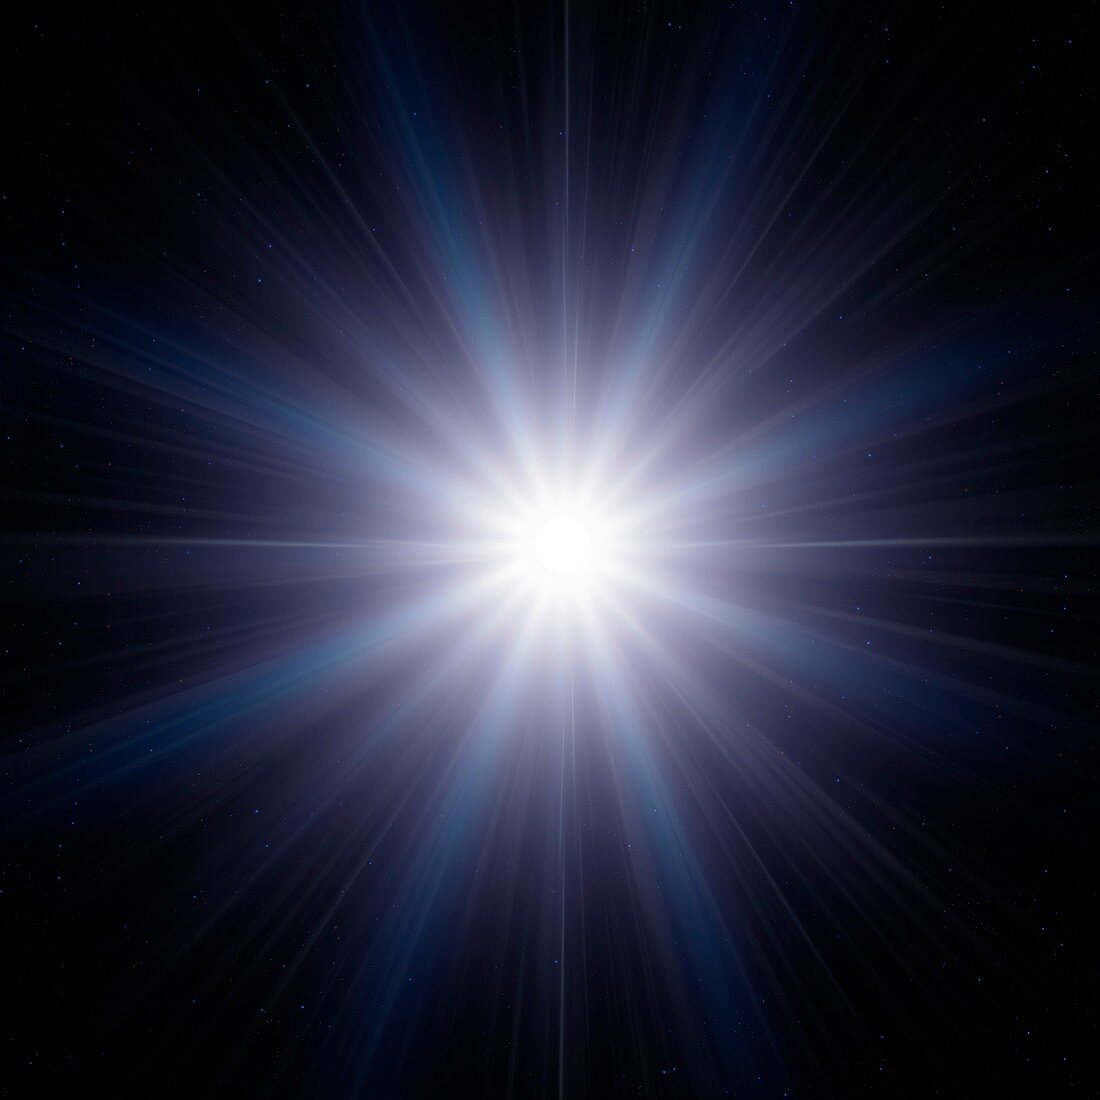 Bright star in space,illustration